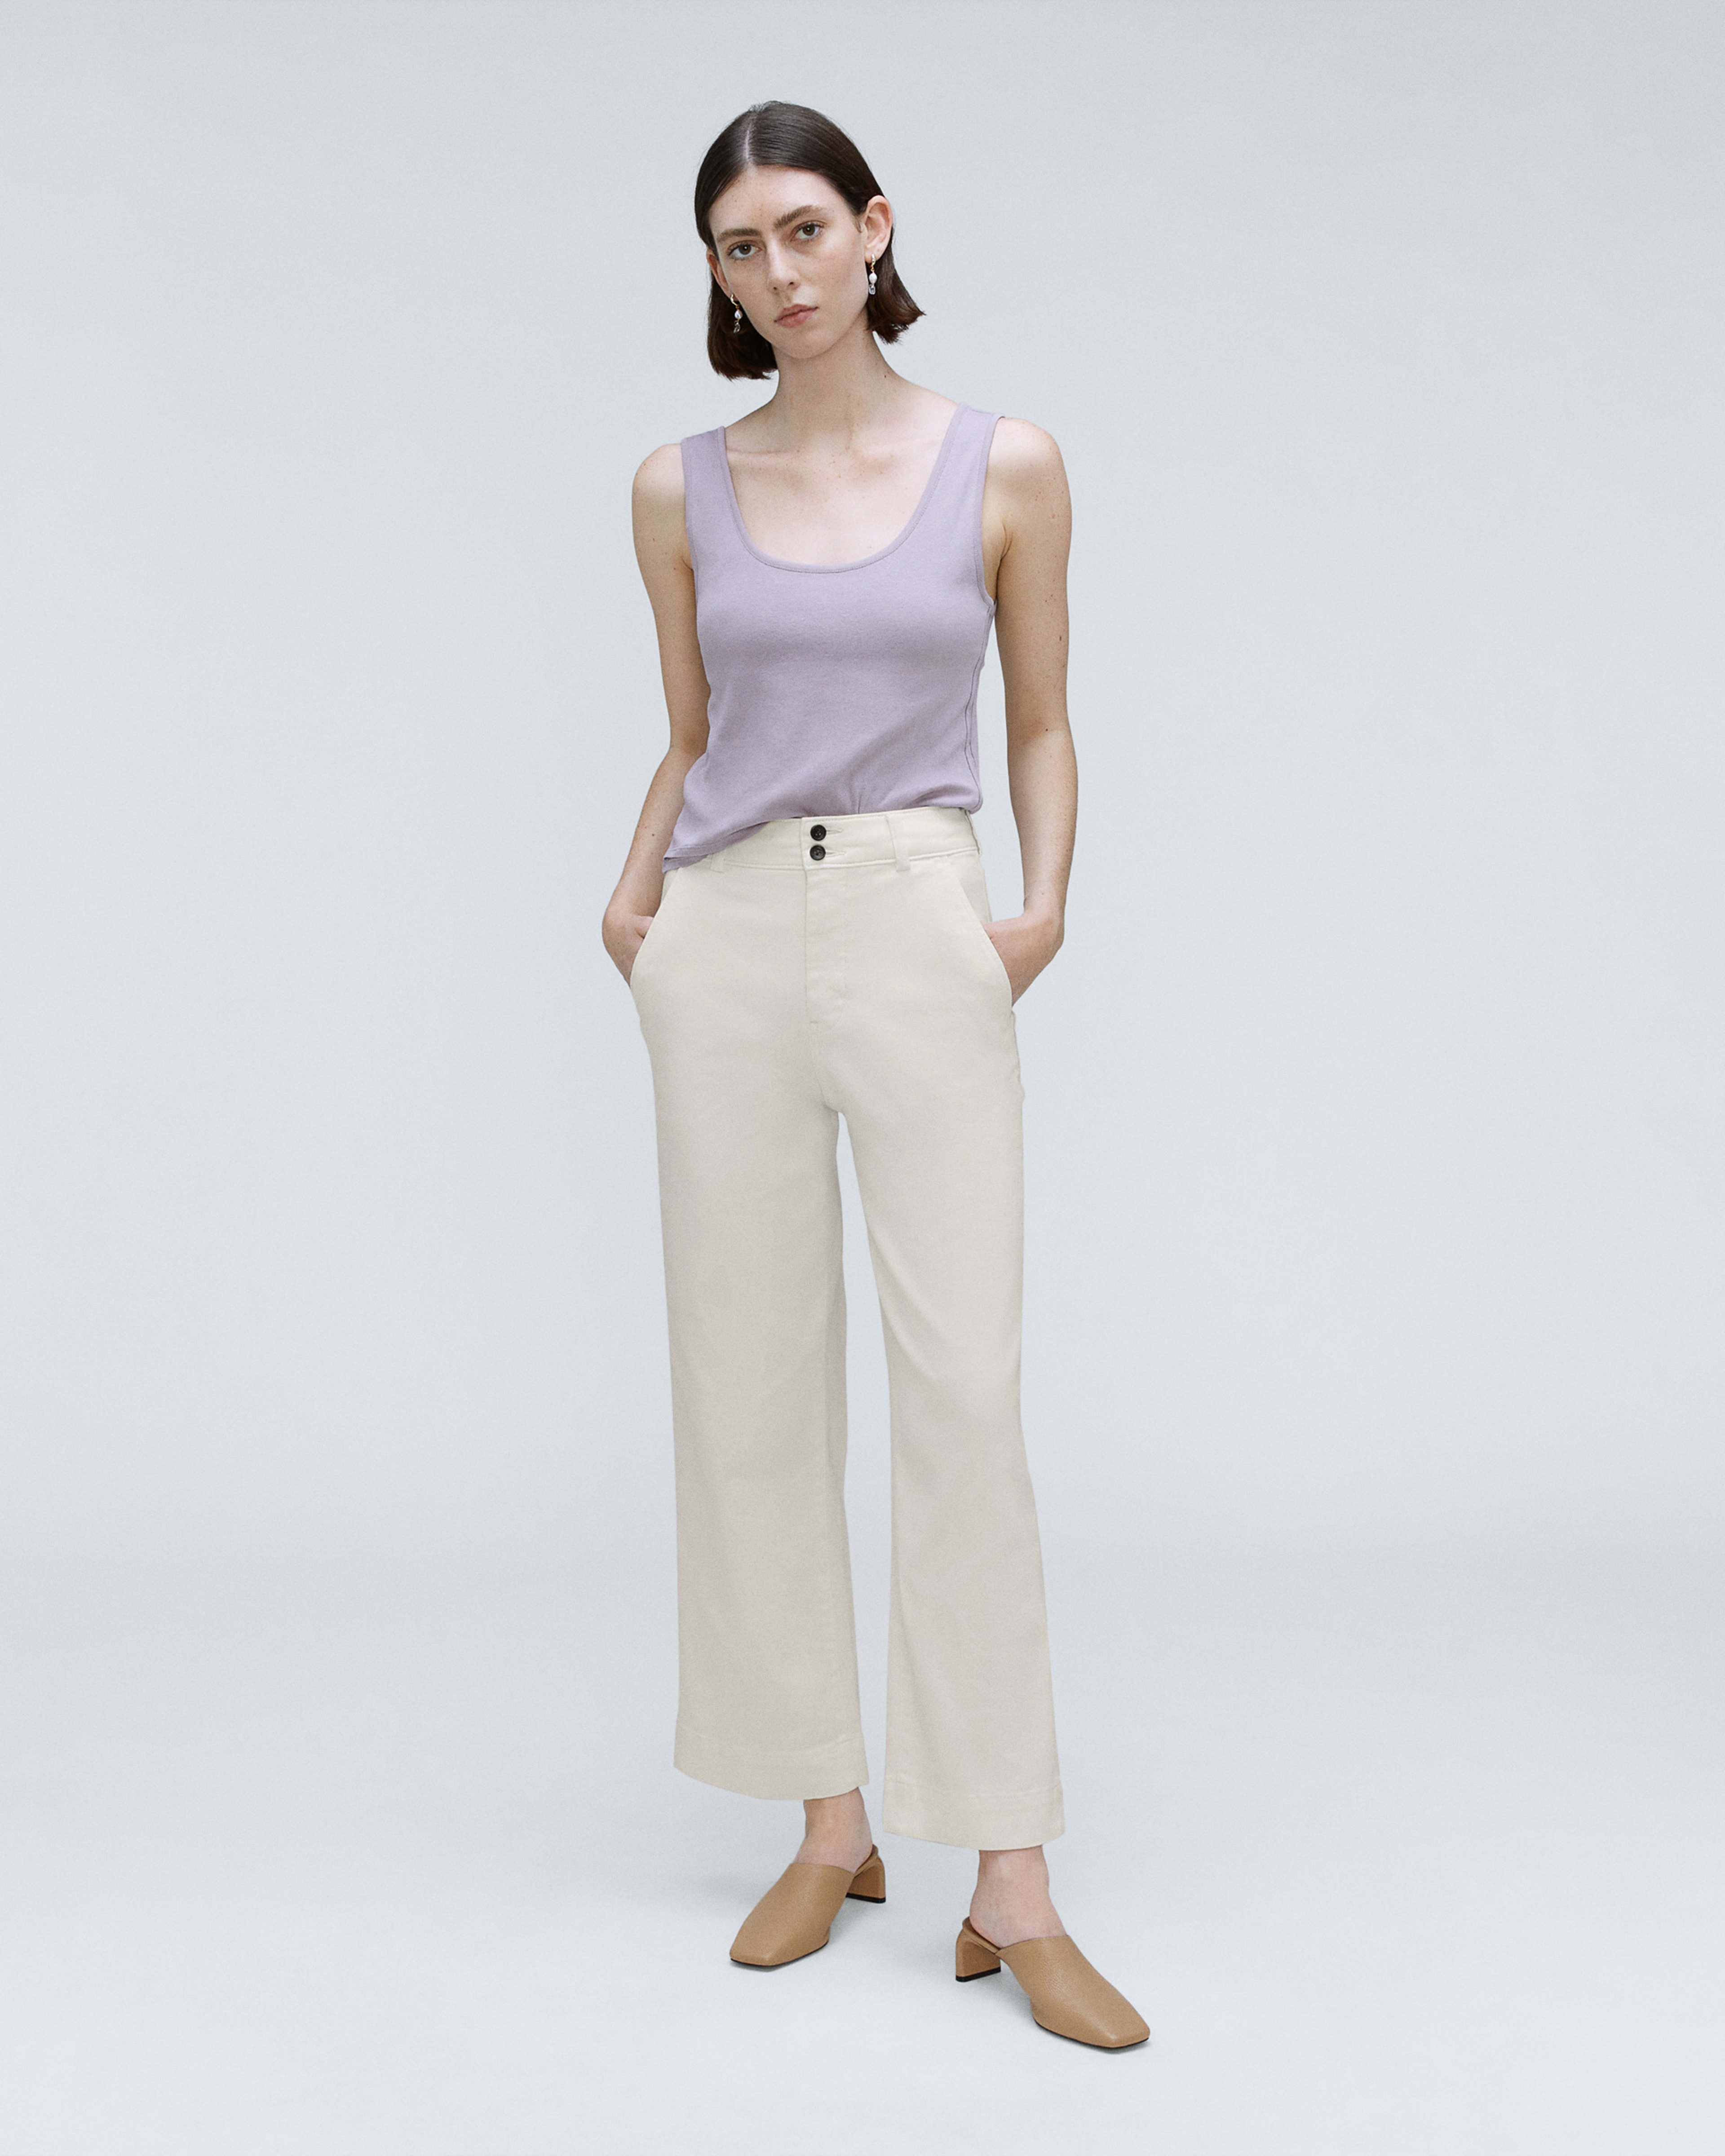 Everlane The Wide Leg Structure Pant White Size 2 NWOT